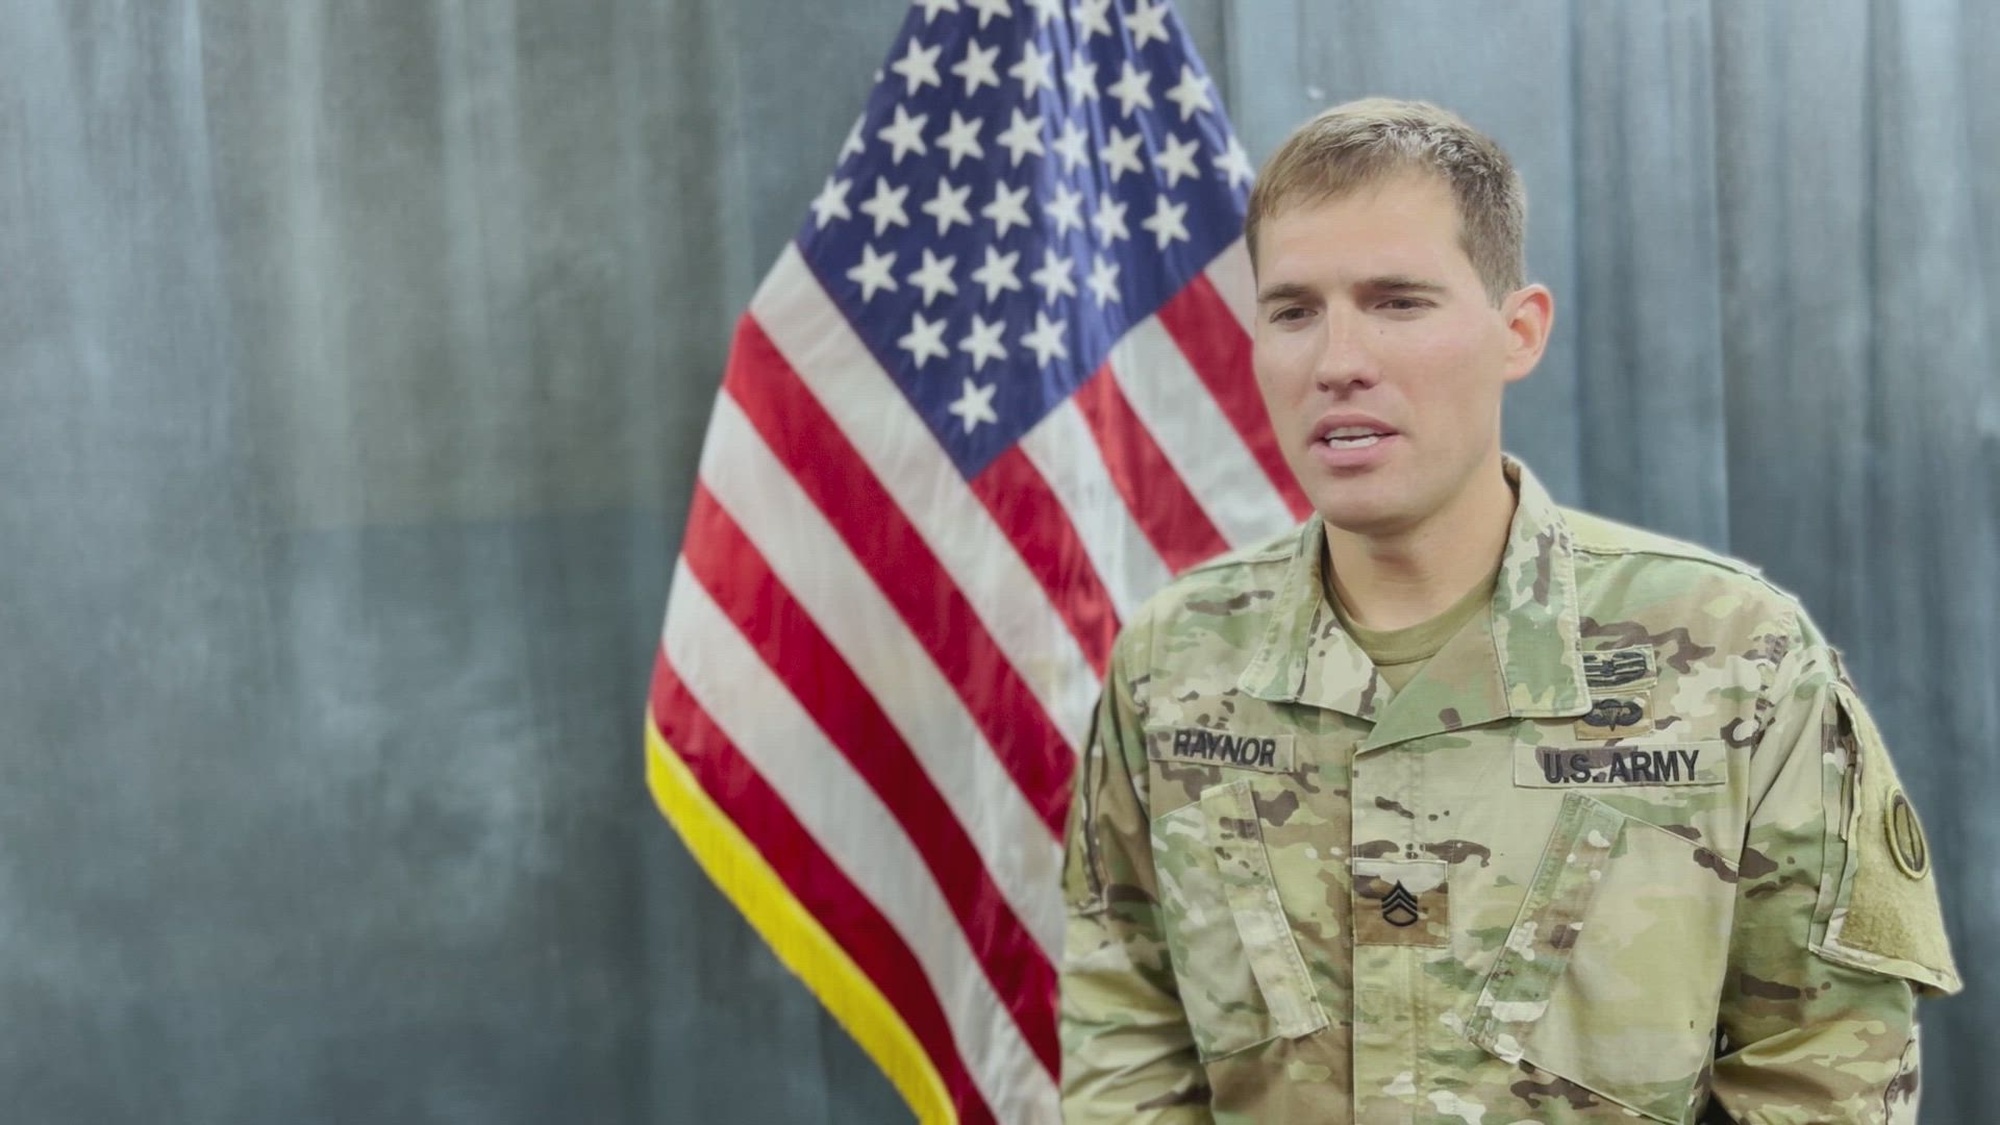 Staff Sgt. Andrew Raynor, Command Chaplains Office, 85th U.S. Army Reserve Support Command, shares his story of service and why he serves.
(U.S. Army Reserve video by Staff Sgt. Erika Whitaker)